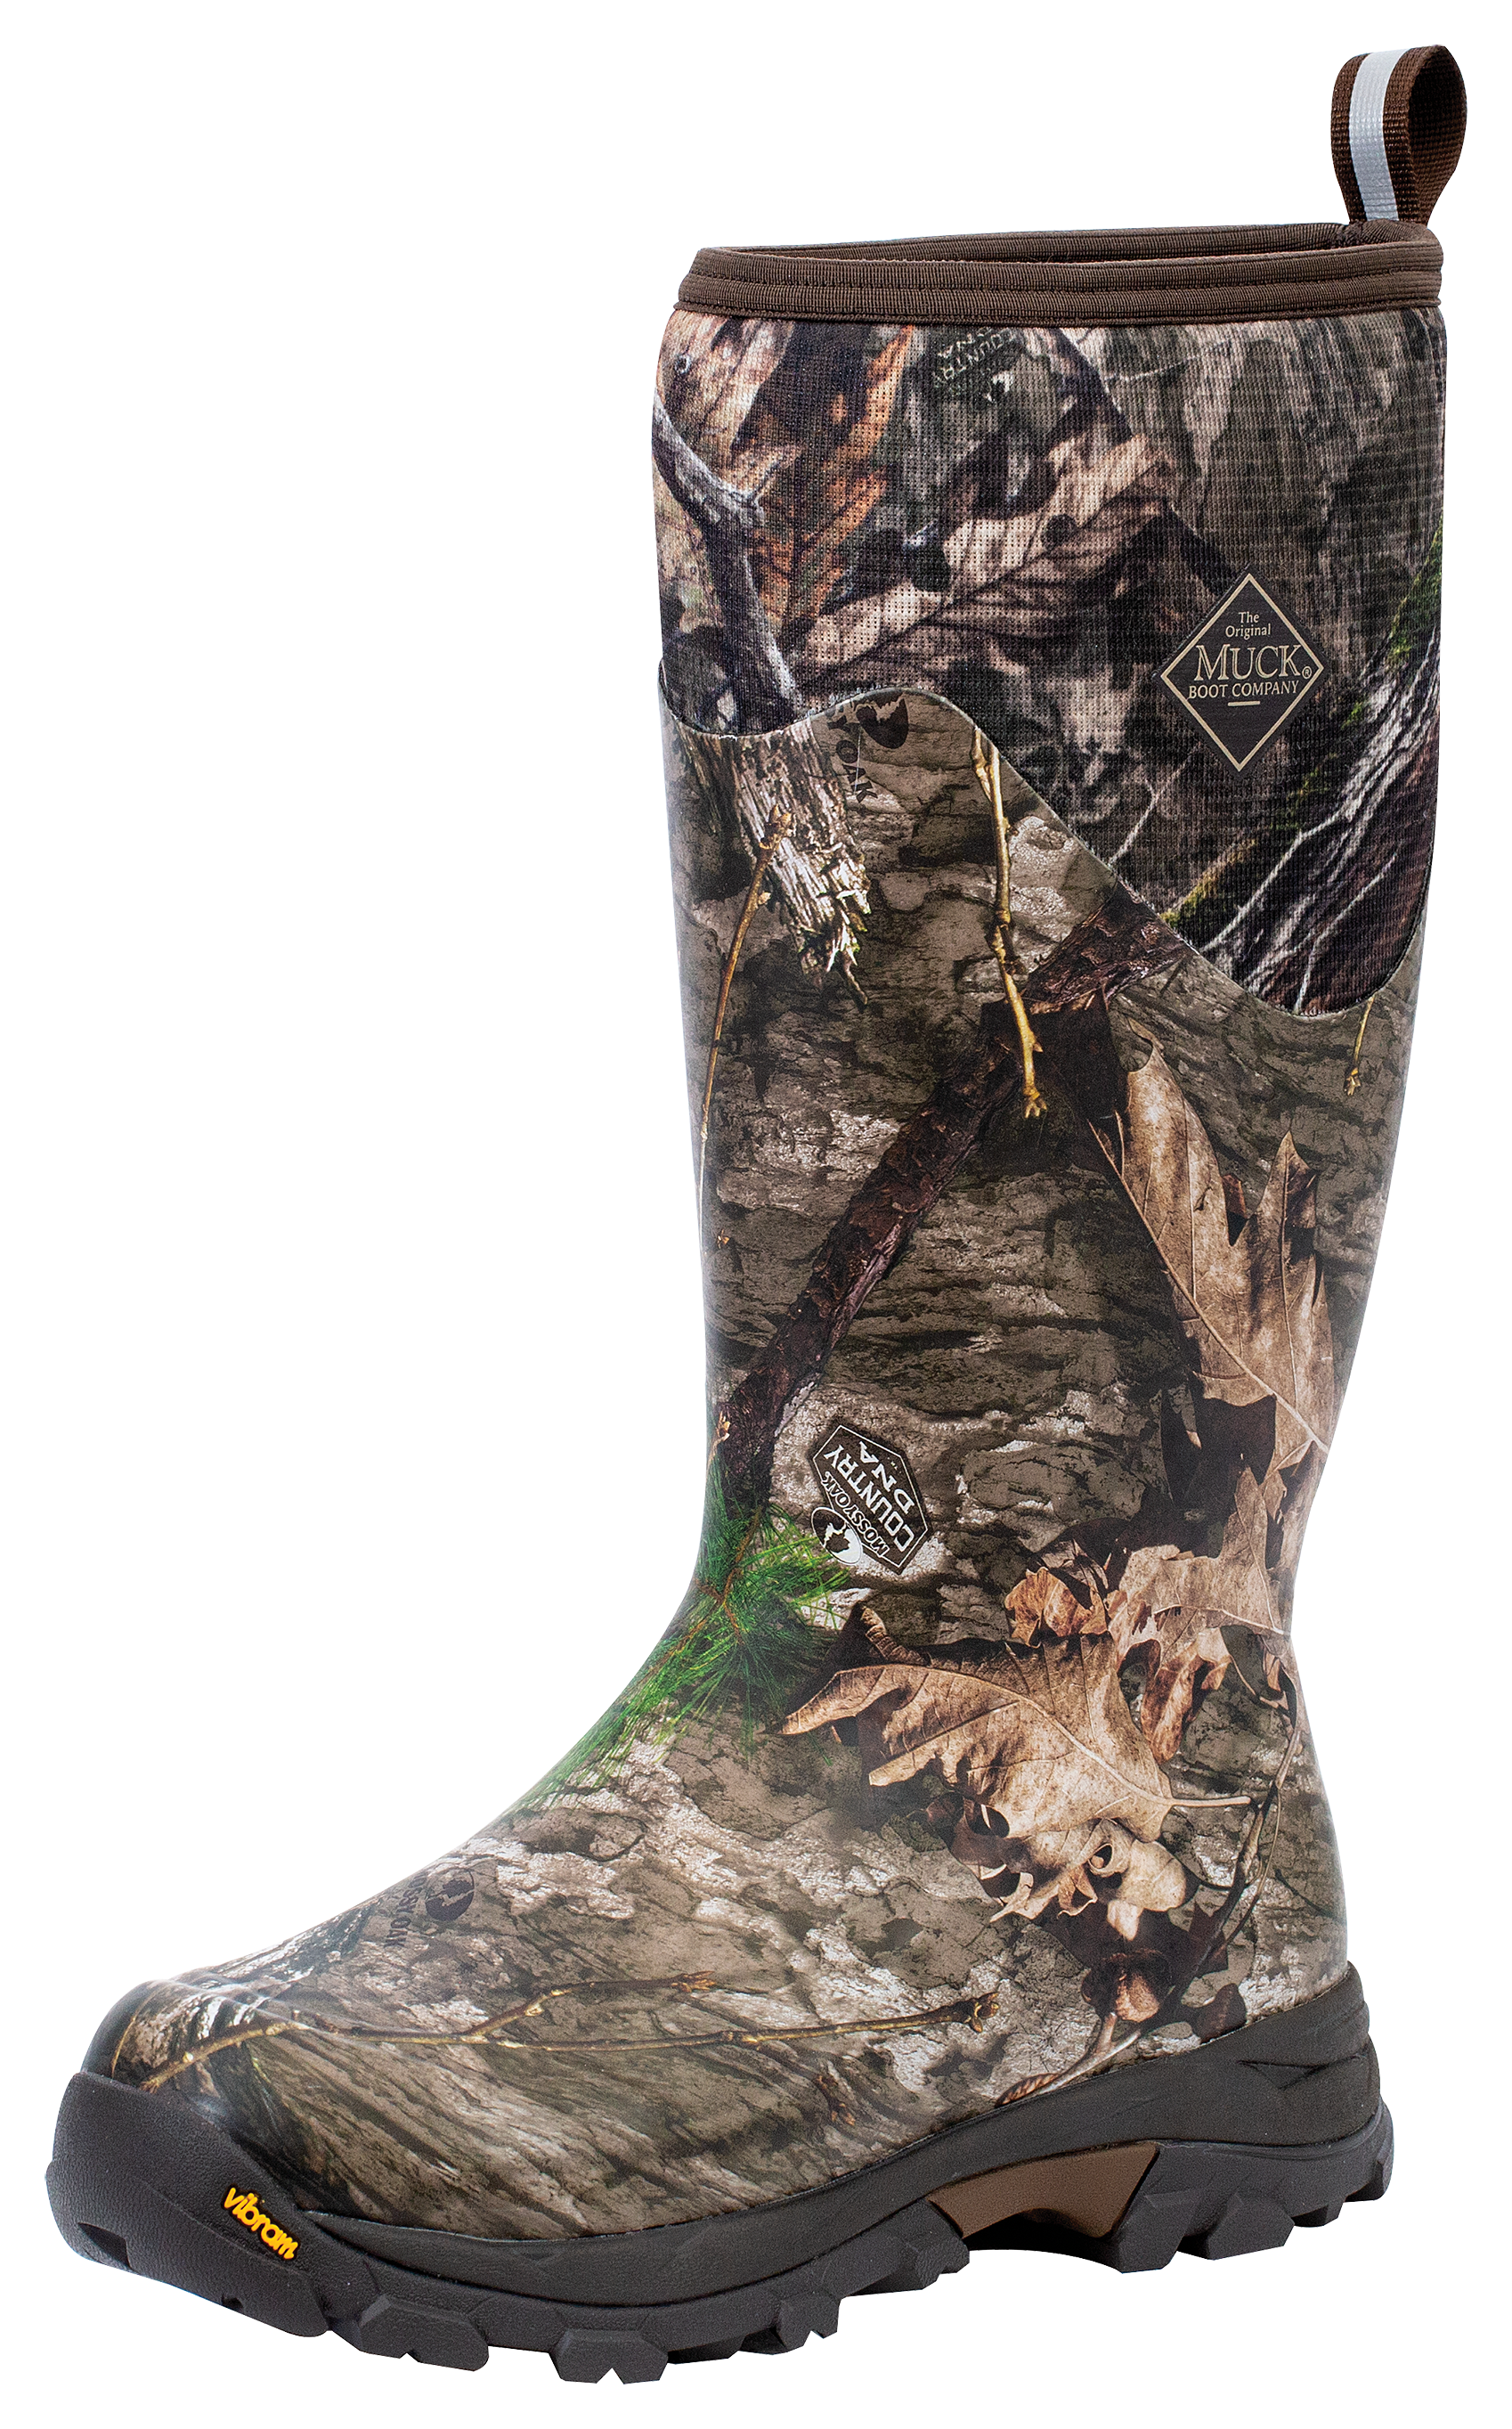 The Original Muck Boot Company Woody Arctic Ice Arctic Grip A.T. Boots for Men - Mossy Oak Country DNA - 9M